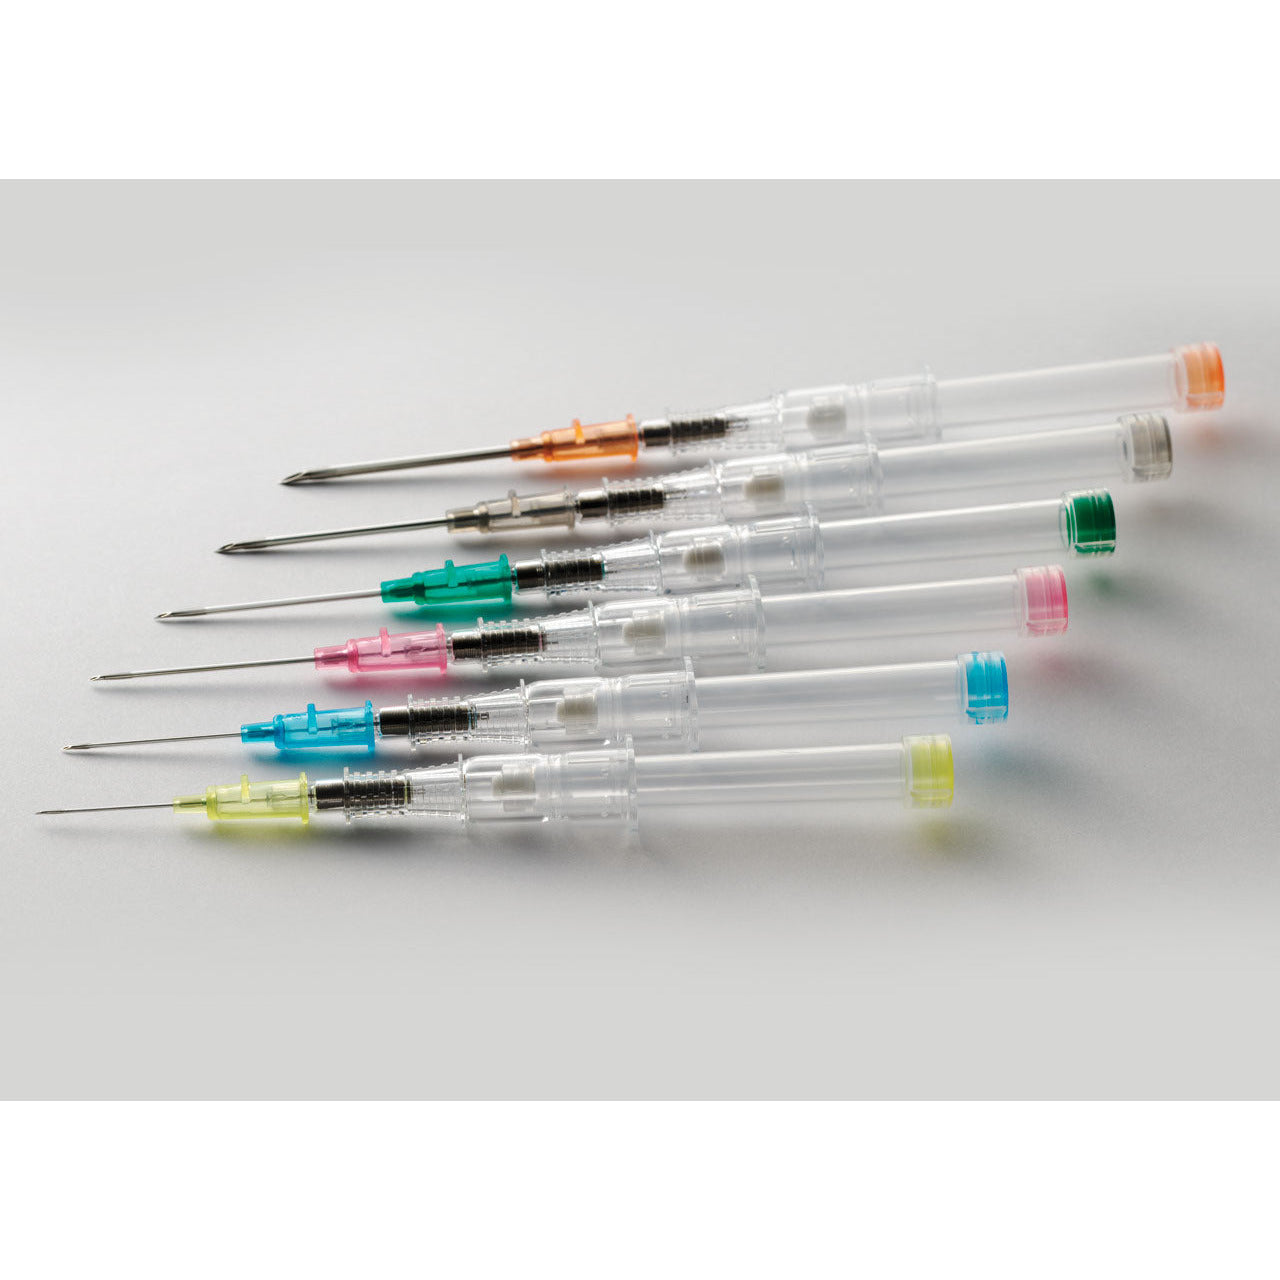 RETRACTABLE VANISHPOINT 31221 Safety IV Catheter, 24G x 3/4", Radiopaque PUR, 200/cs RX ONLY